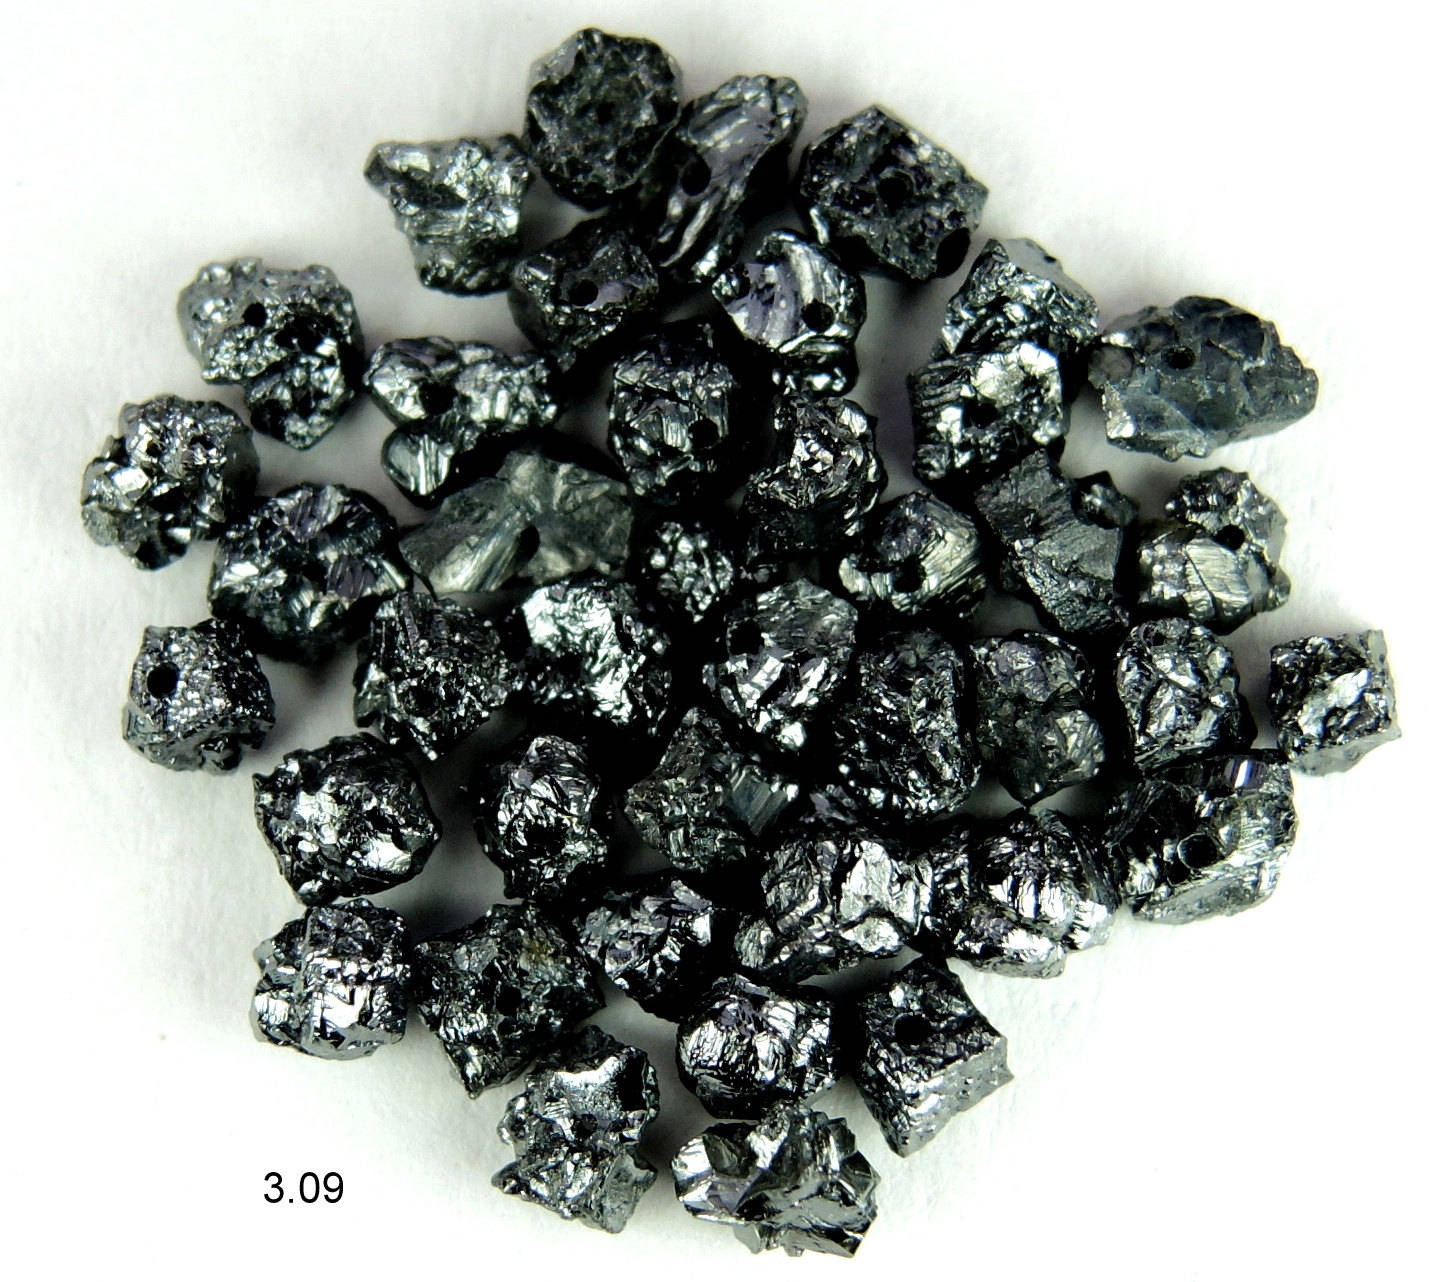 Natural Loose Diamond Rough Black Color 1.80 to 2.50 MM Uncut Drilled Bead 30 Pieces Q101